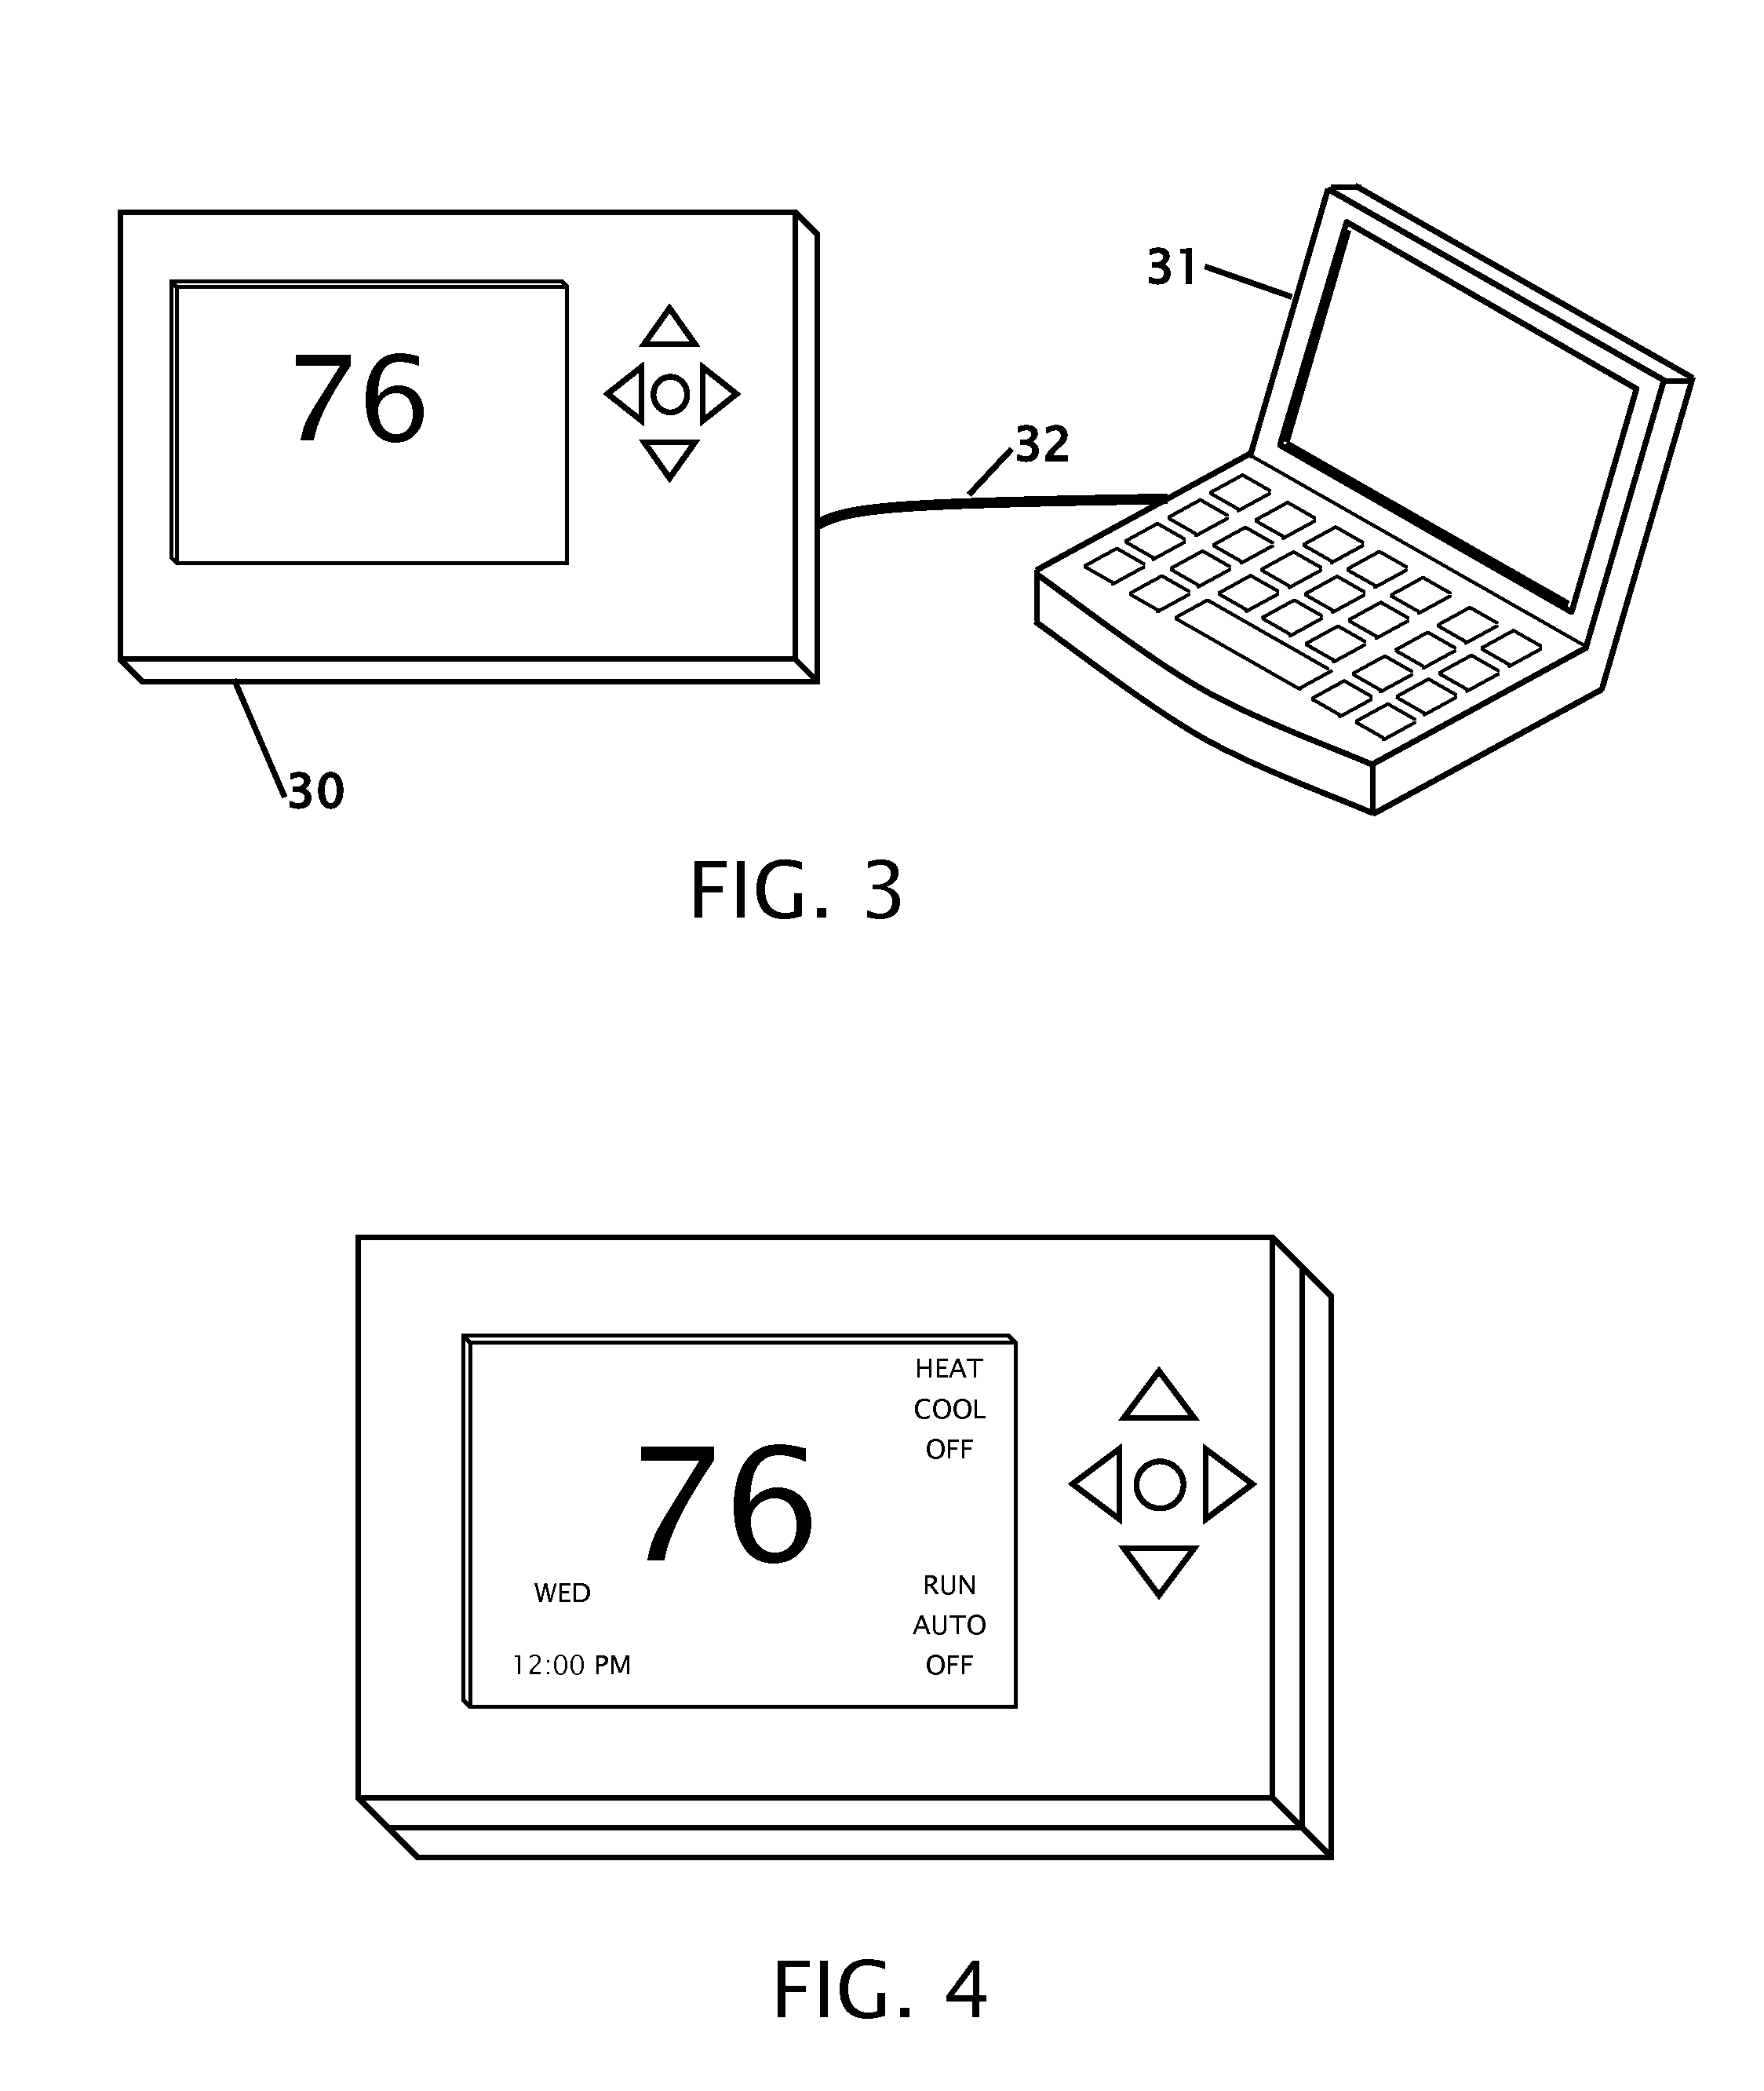 Thermostat and irrigation controller with removable user interface